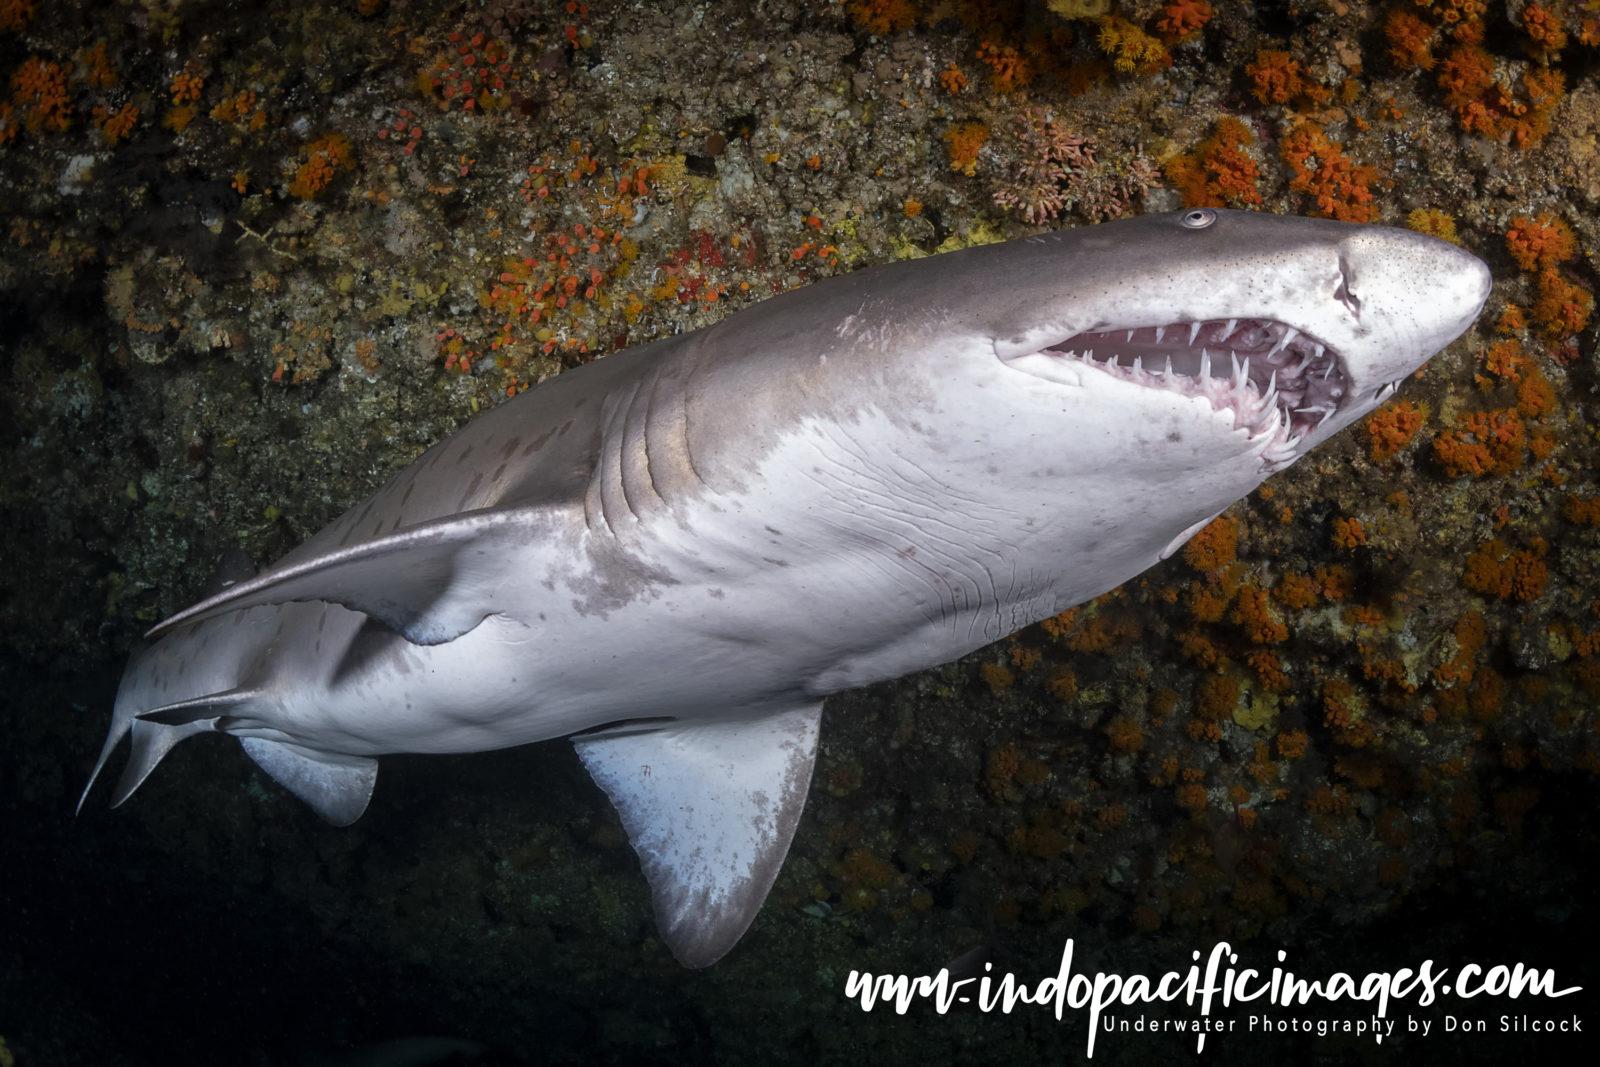 South Africa, Ragged Tooth Shark